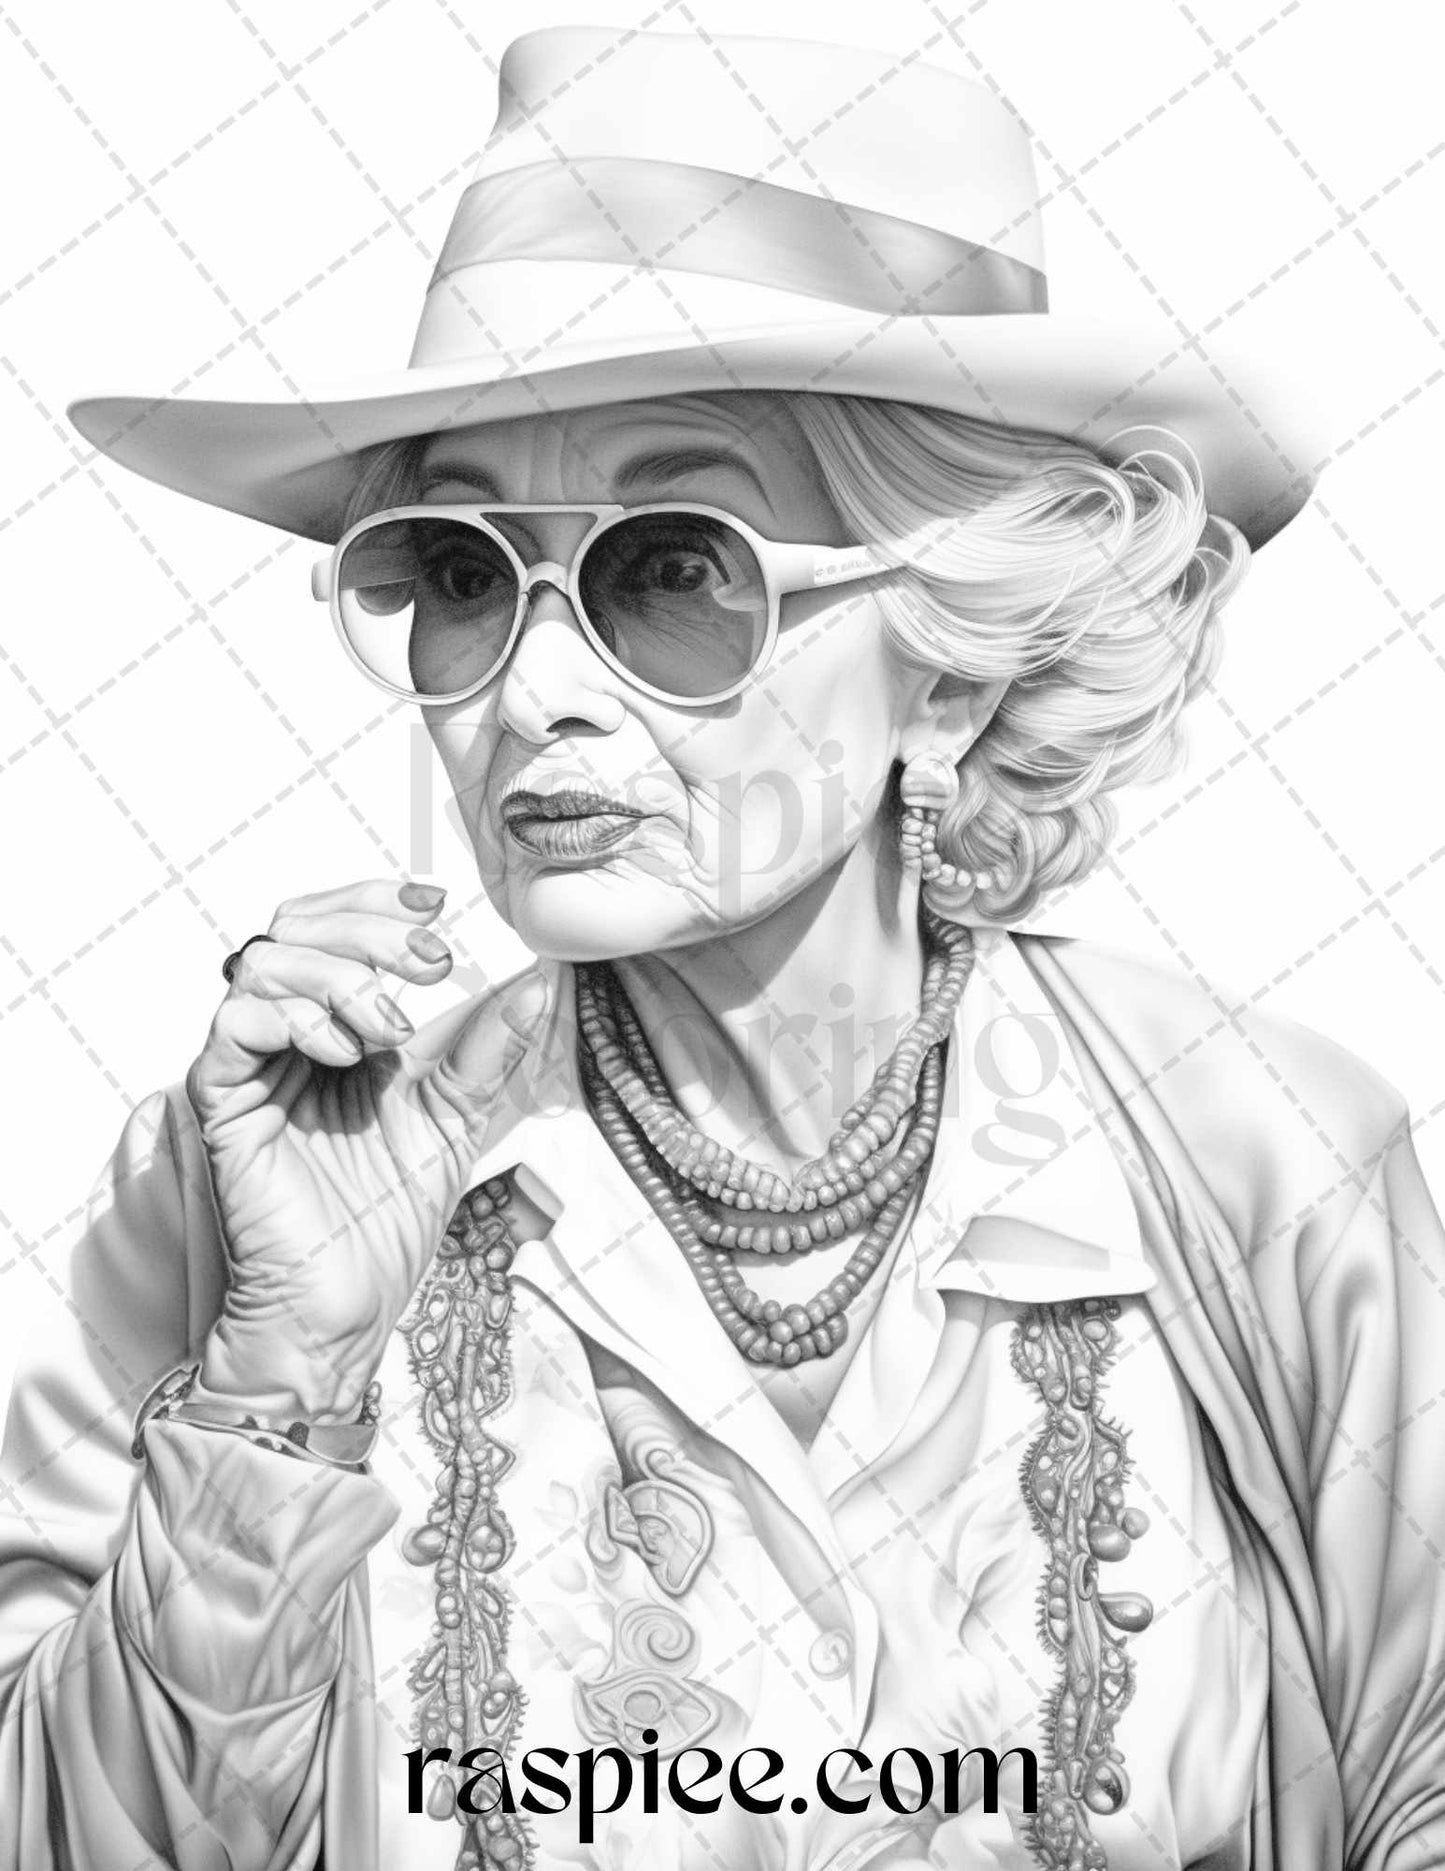 Fashionista Grandma Coloring Pages, Grayscale Coloring Sheets, Printable Adult Coloring Pages, Stylish Grandmother Gifts, Unique Gifts for Seniors, Printable Crafts for Adults, Trendy Coloring Activities, Creative Hobby for Grandmas, Elegant Coloring Books, High-Quality Coloring Printables, Fashionable Adult Coloring, Portrait Coloring Pages